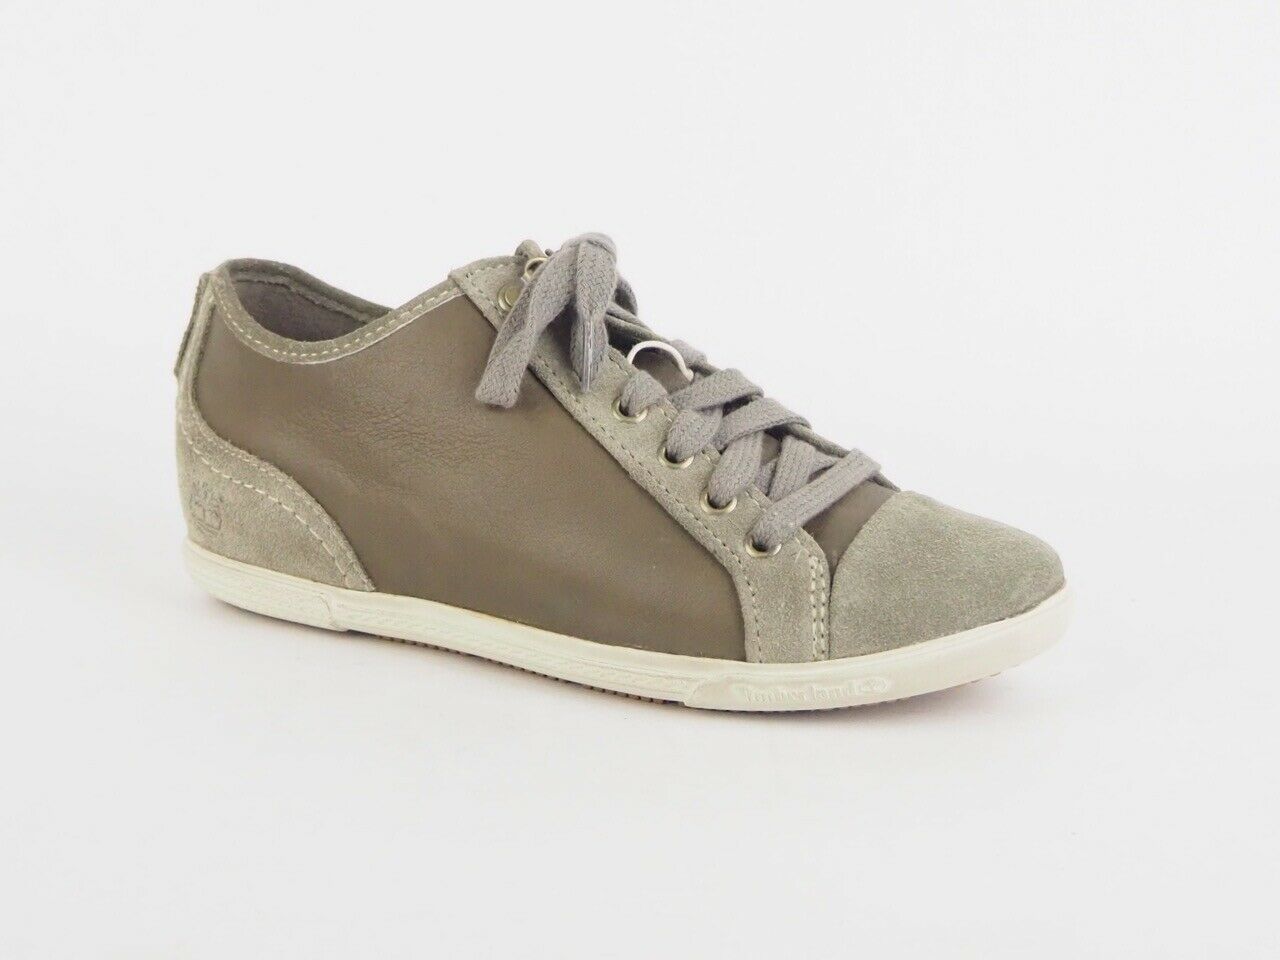 Womens Timberland Ballard Ox Grey Trainers 3849R Leather Lace Up Ladies Shoes - London Top Style